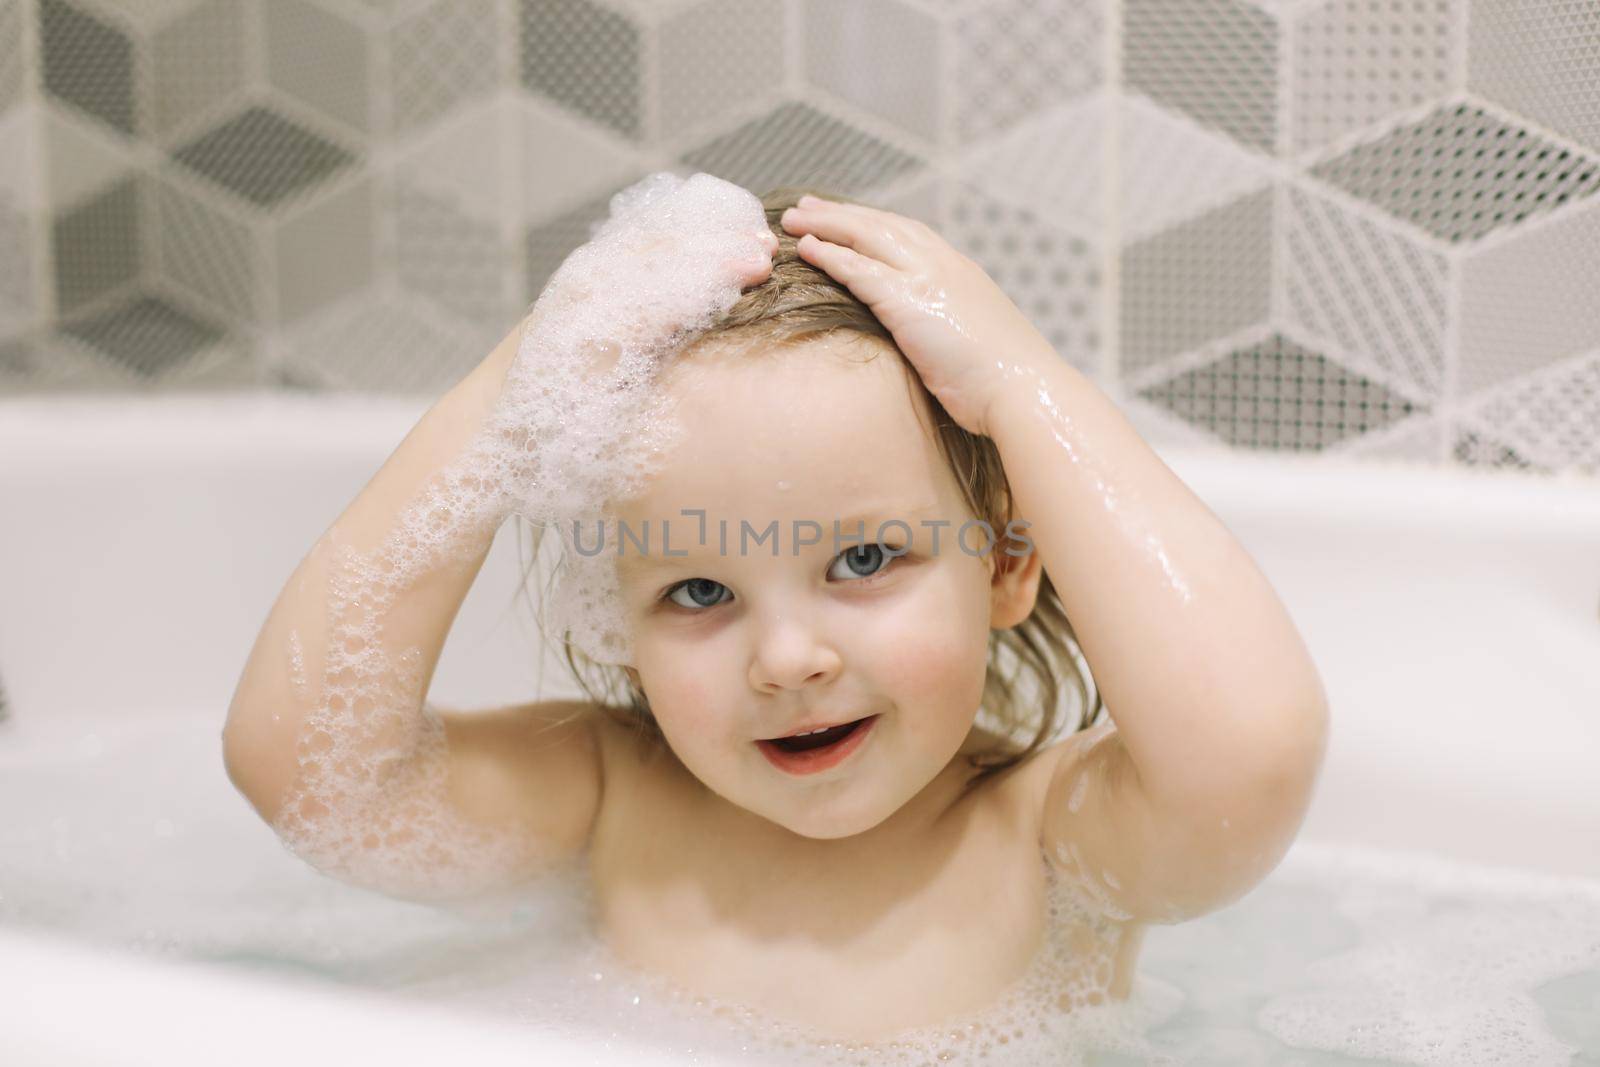 Child bathing. Little baby taking bath, closeup face portrait of smiling girl, health care and kids hygiene by paralisart